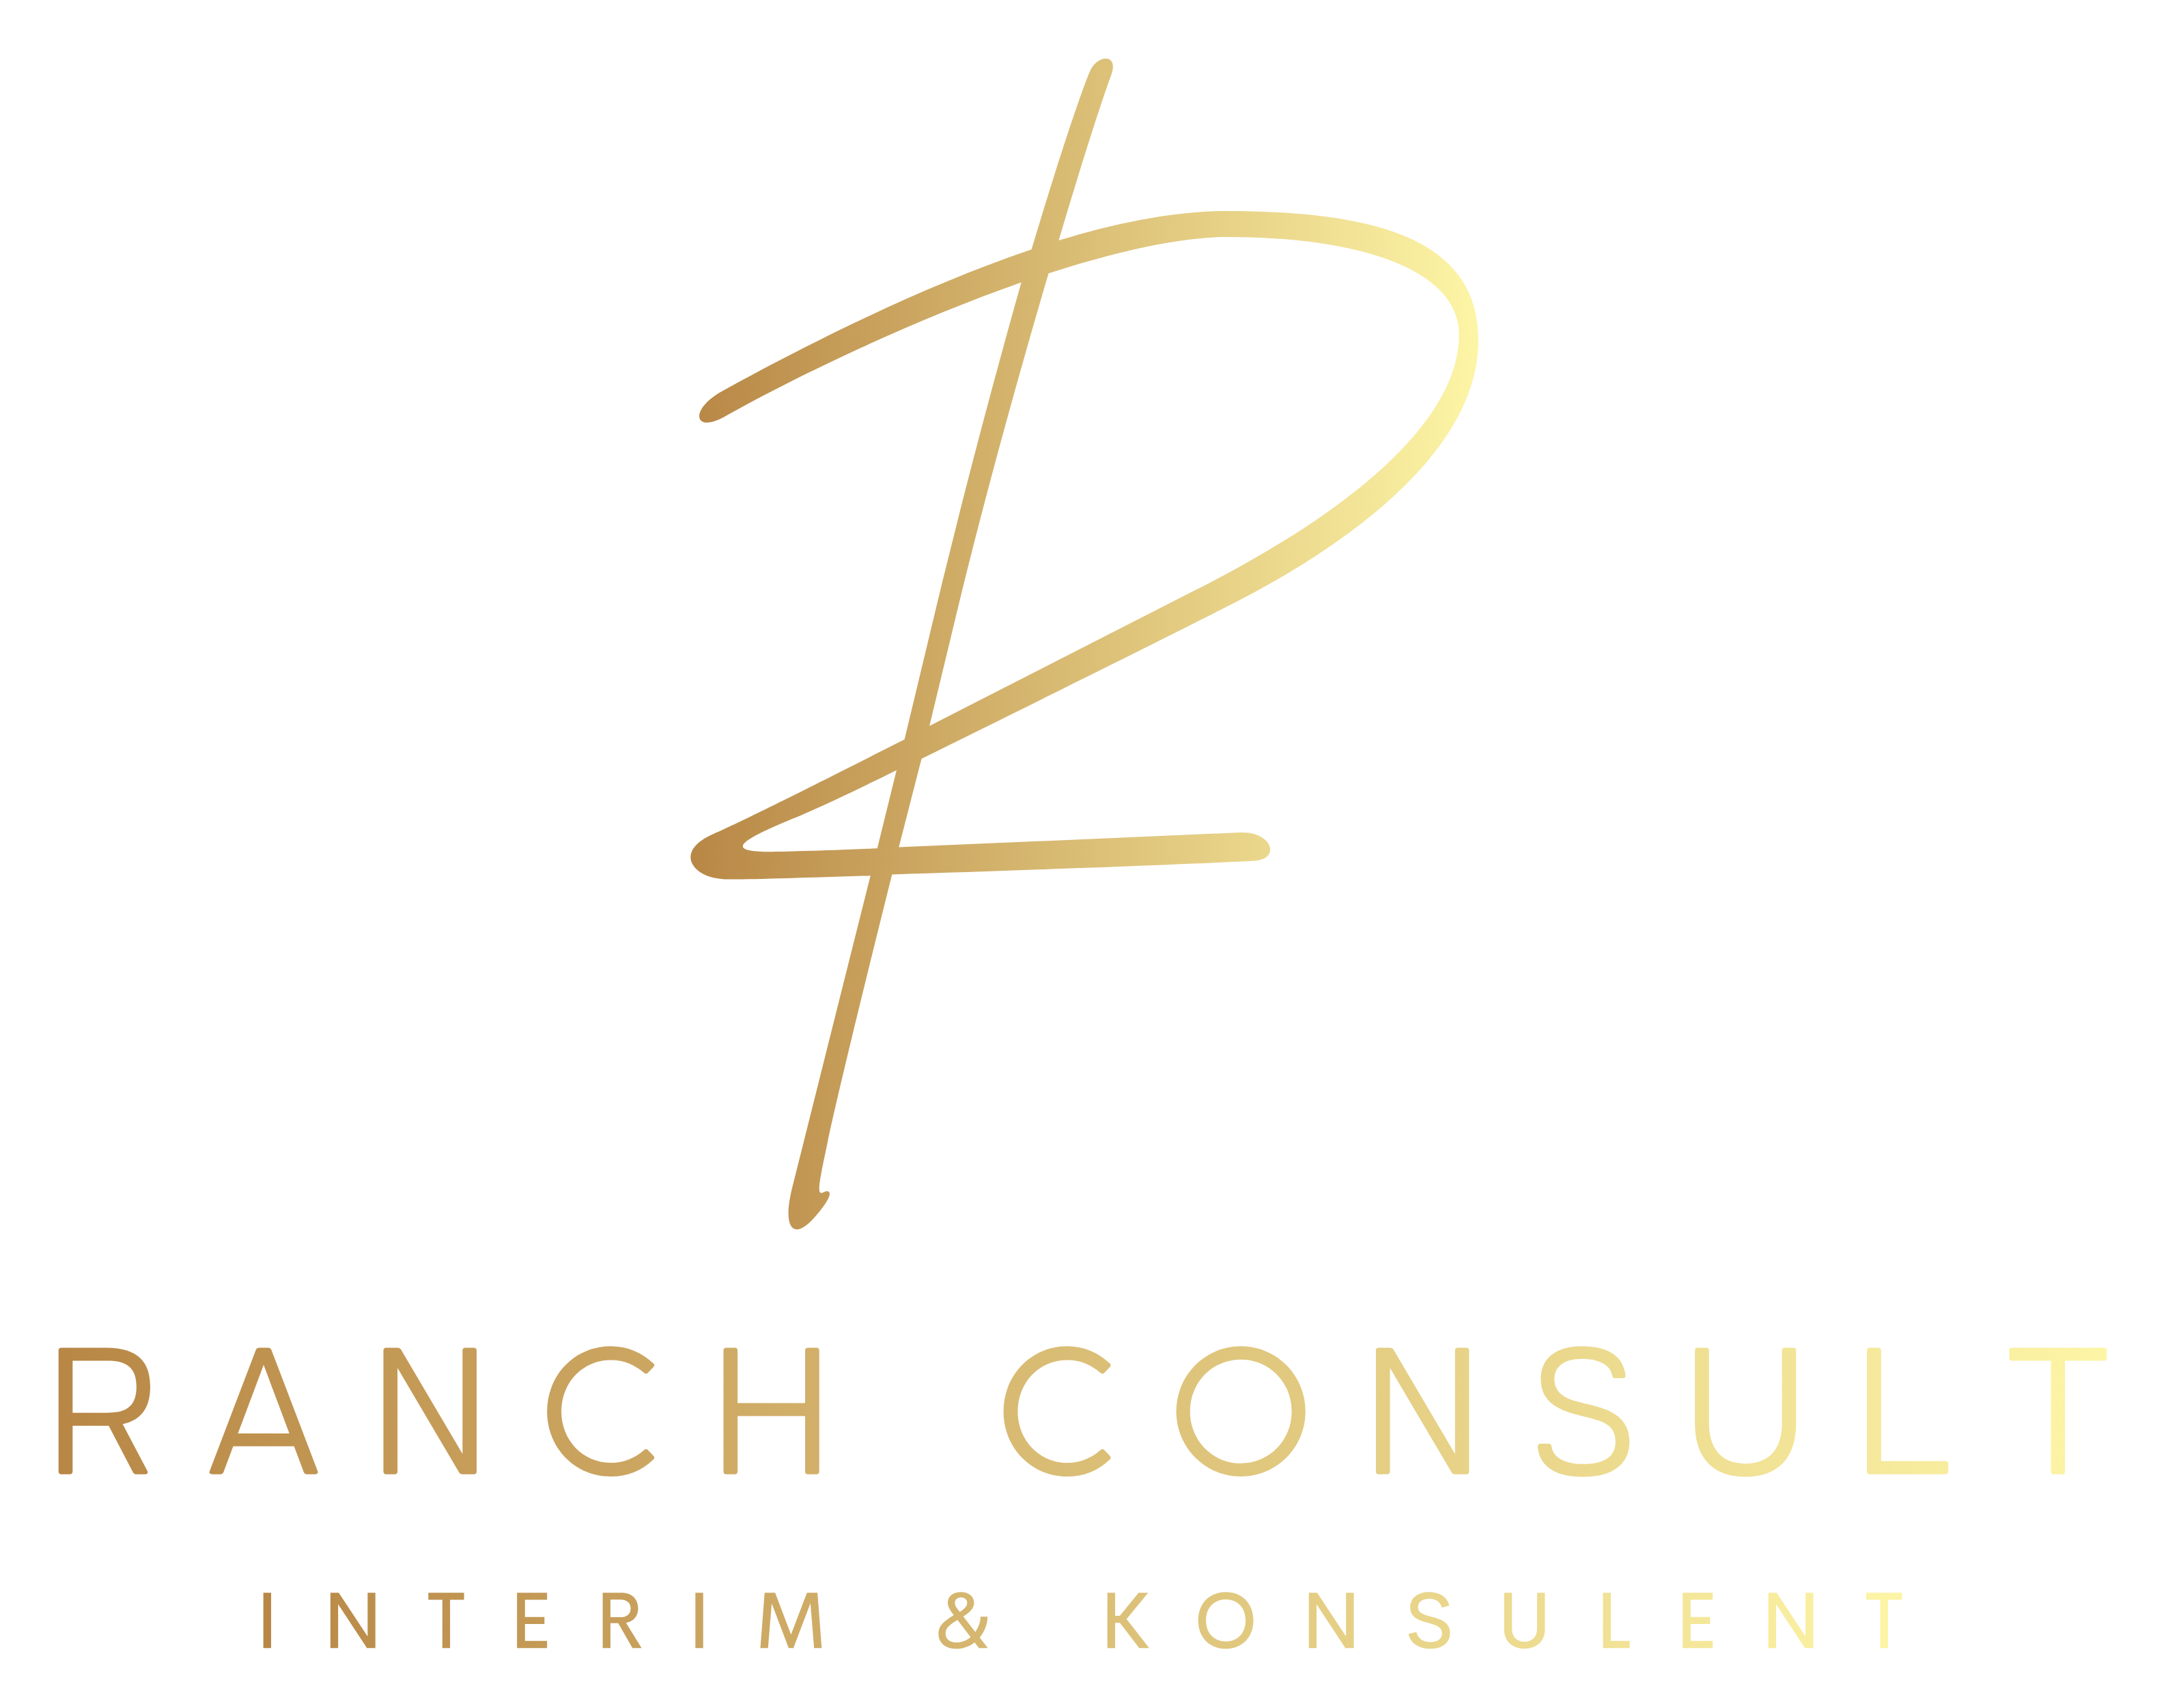 RANCH CONSULT